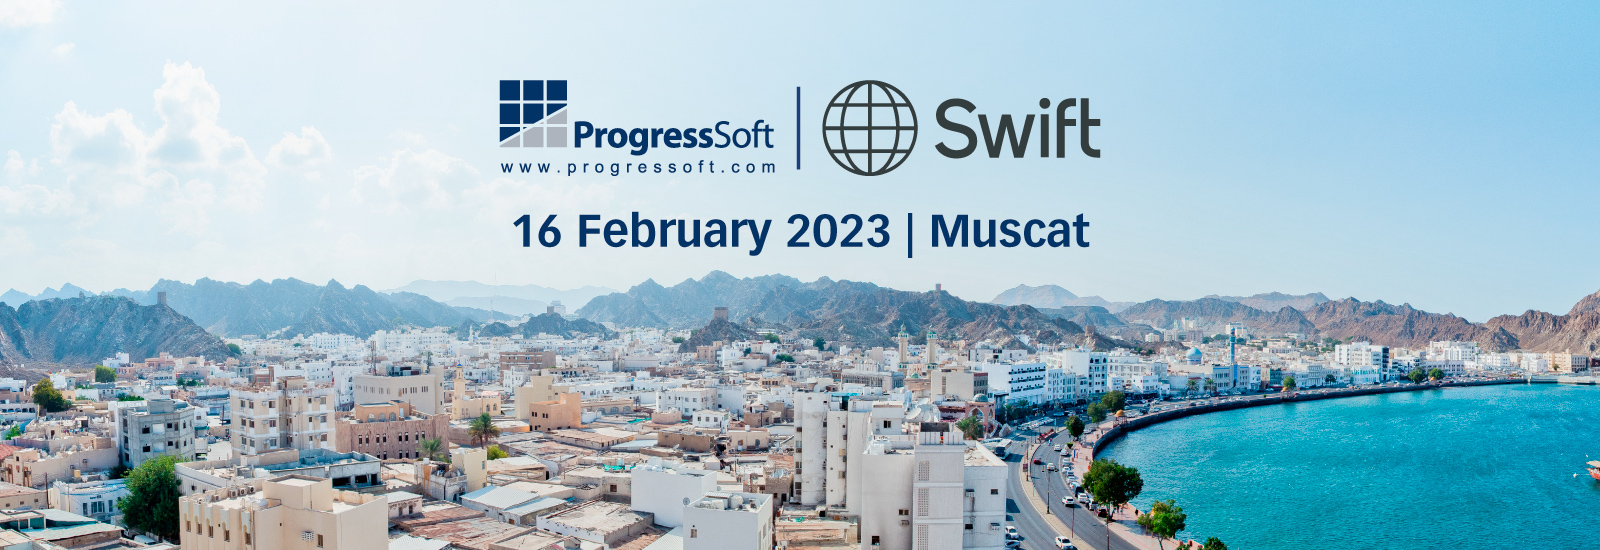 Swift and ProgressSoft: The Path Ahead to Swift Services